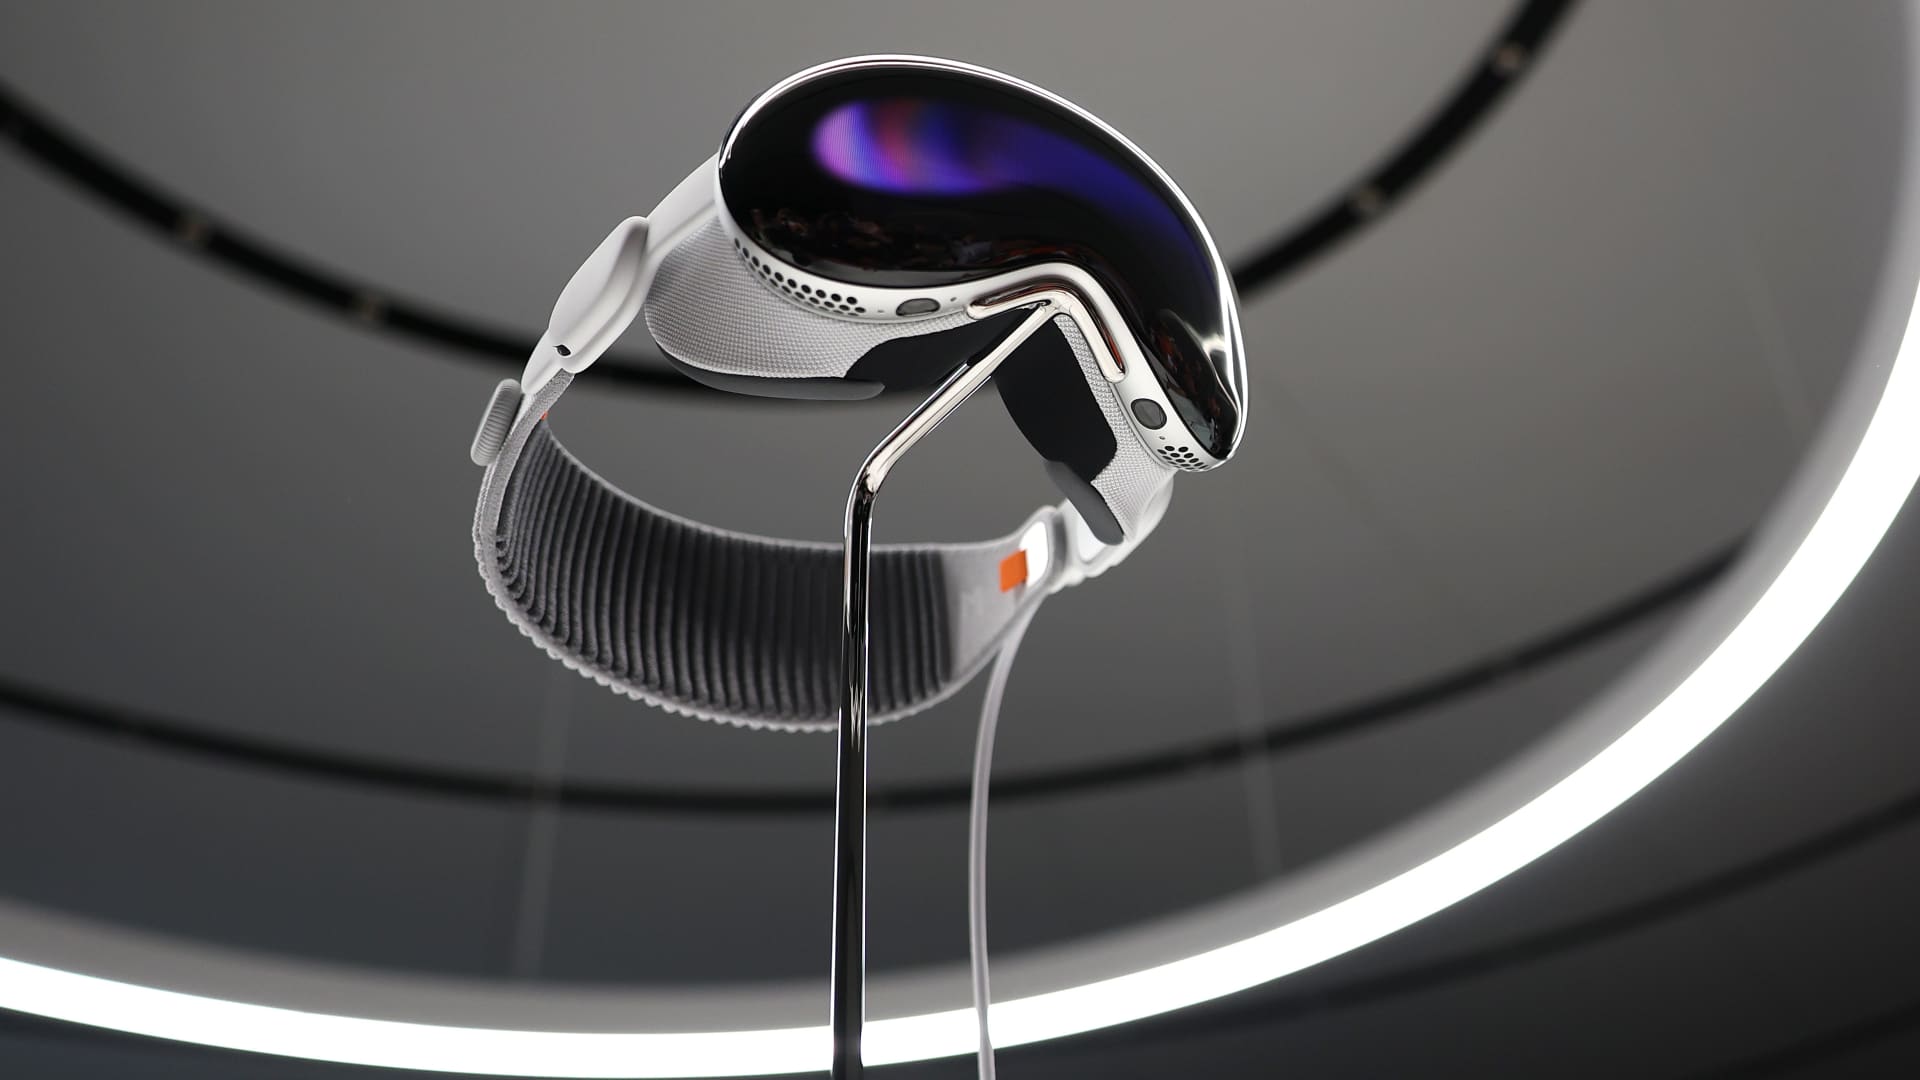 The new Apple Vision Pro headset is displayed during the Apple Worldwide Developers Conference in Cupertino, California, June 5, 2023.